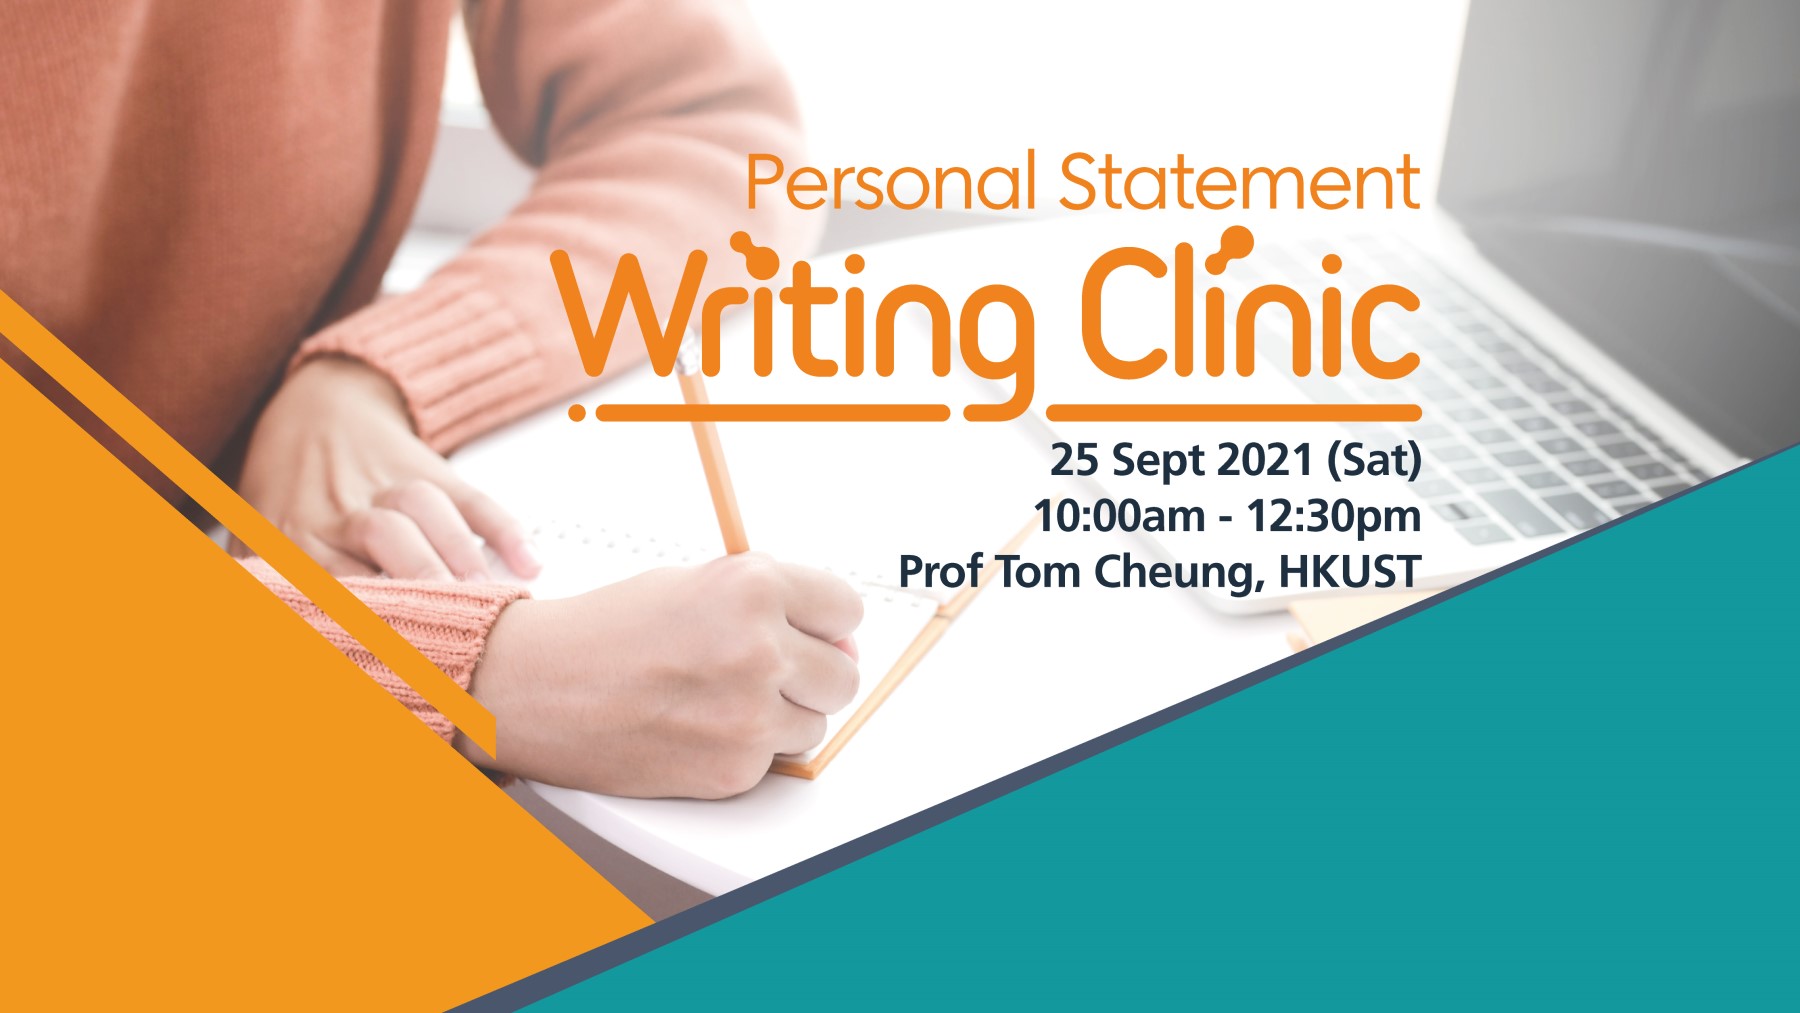 Personal Statement Writing Clinic